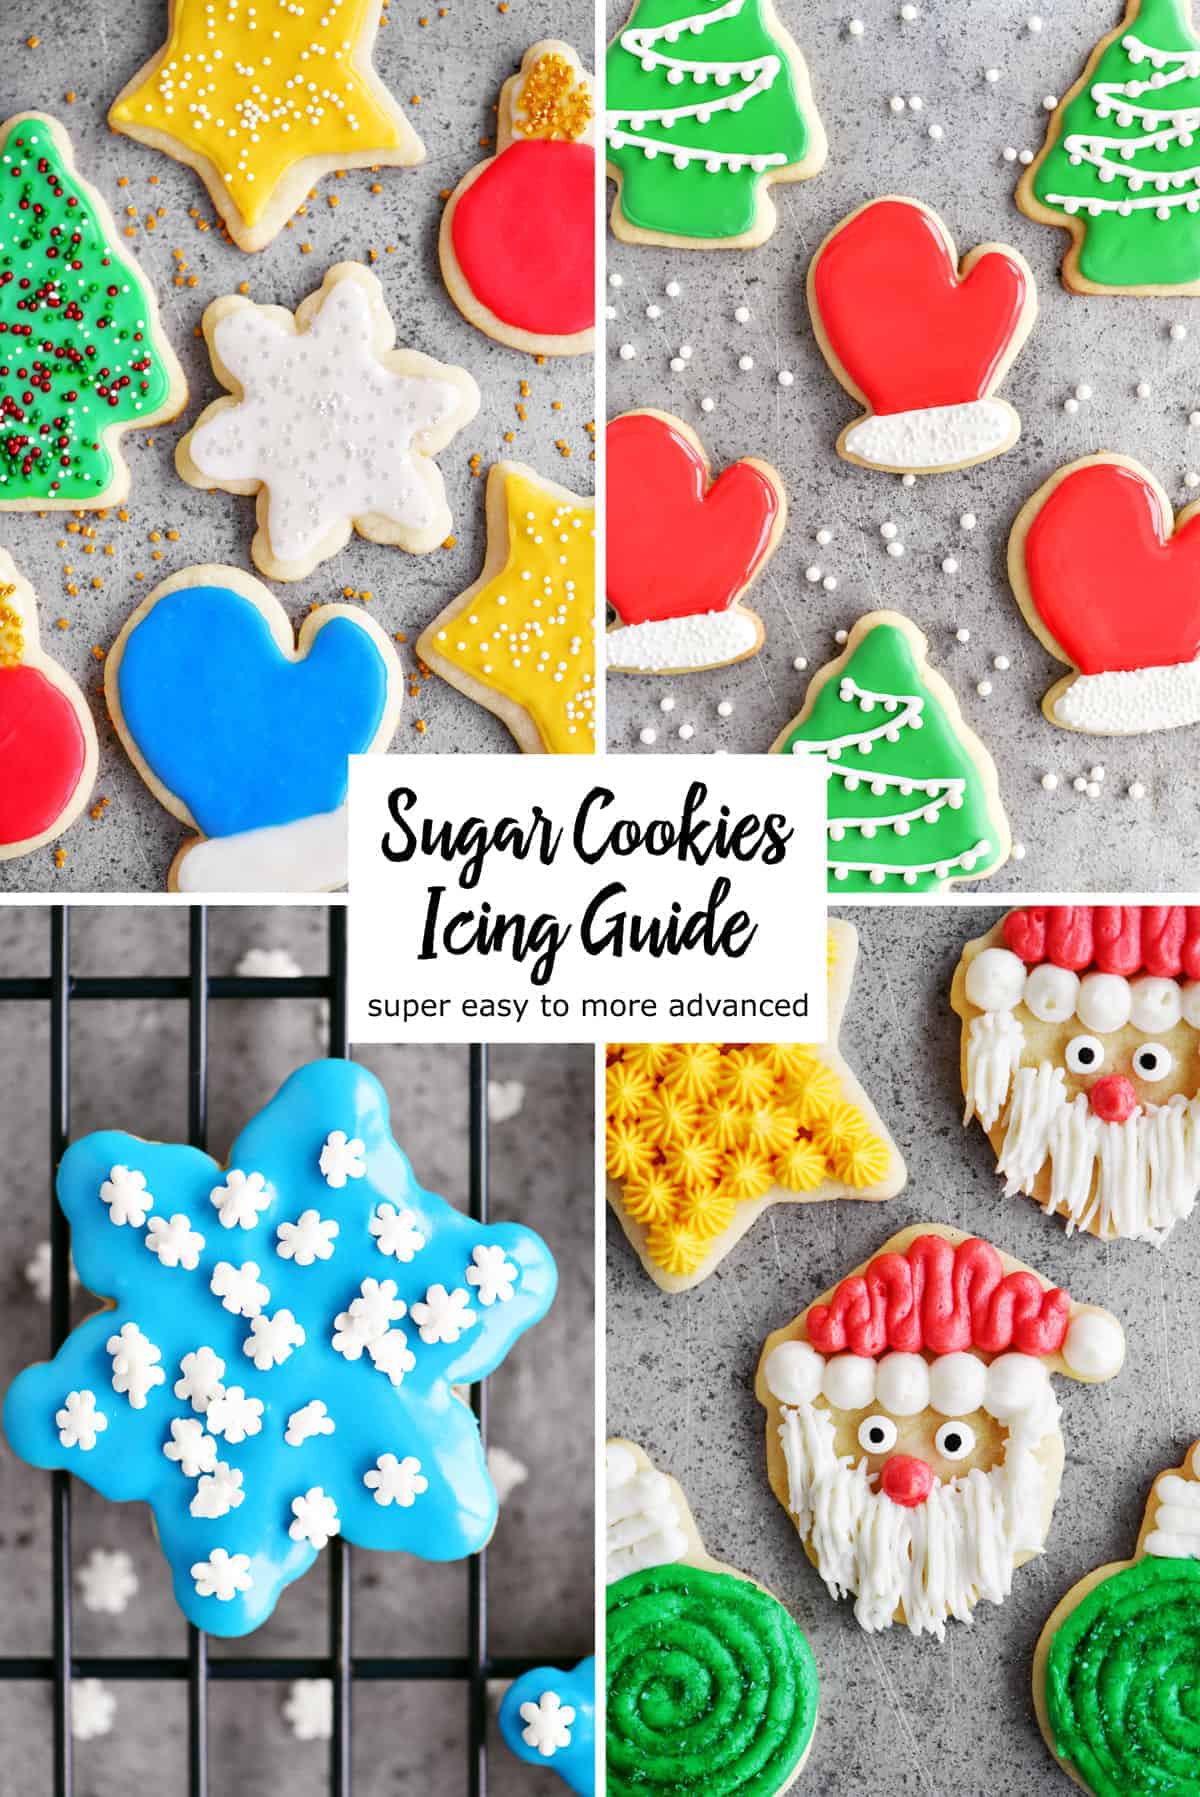 The Ultimate Guide to Royal Icing for Decorating Holiday Cookies